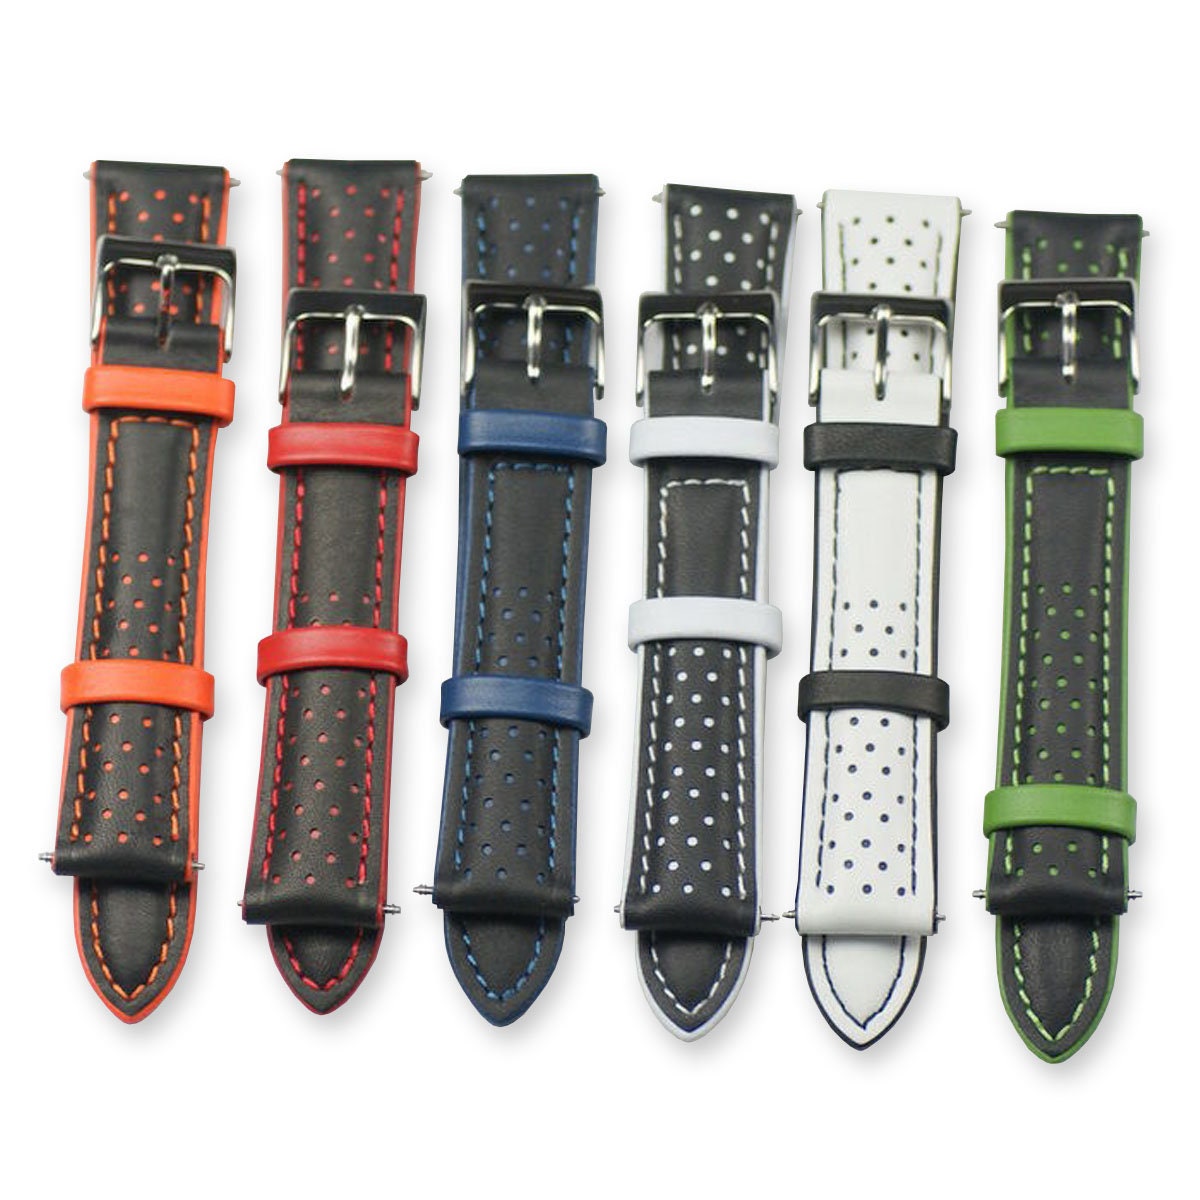 Racing Contrast Genuine Leather Perforated Mens Watch Straps